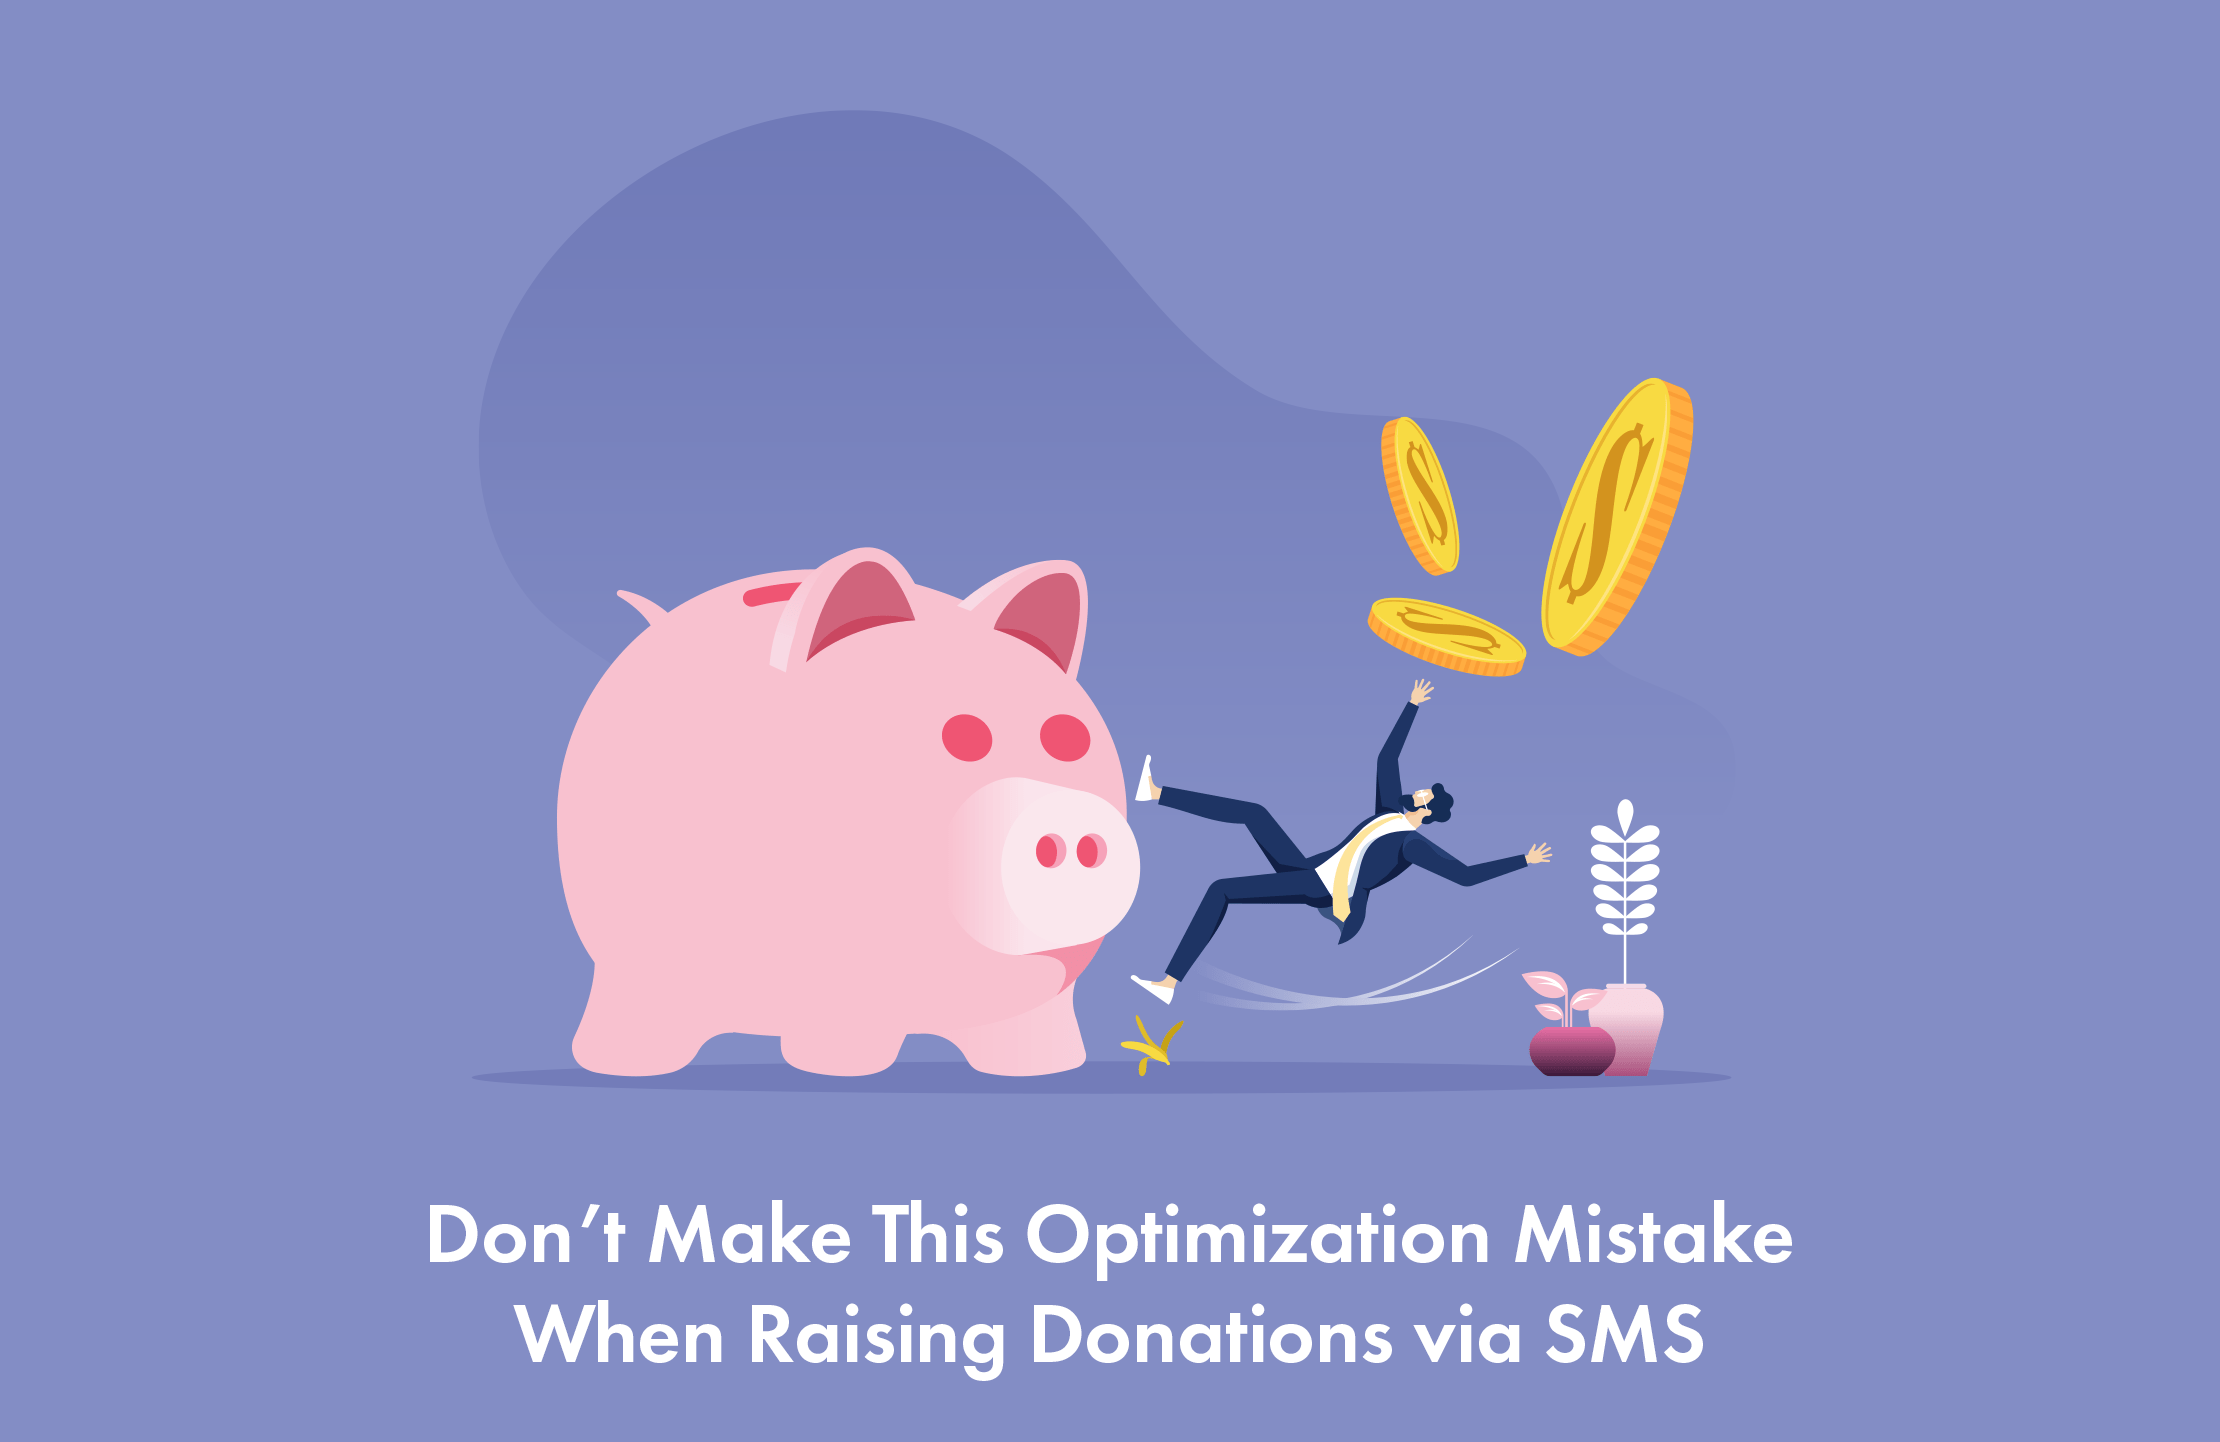 Don’t Make This Optimization Mistake When Raising Donations via SMS